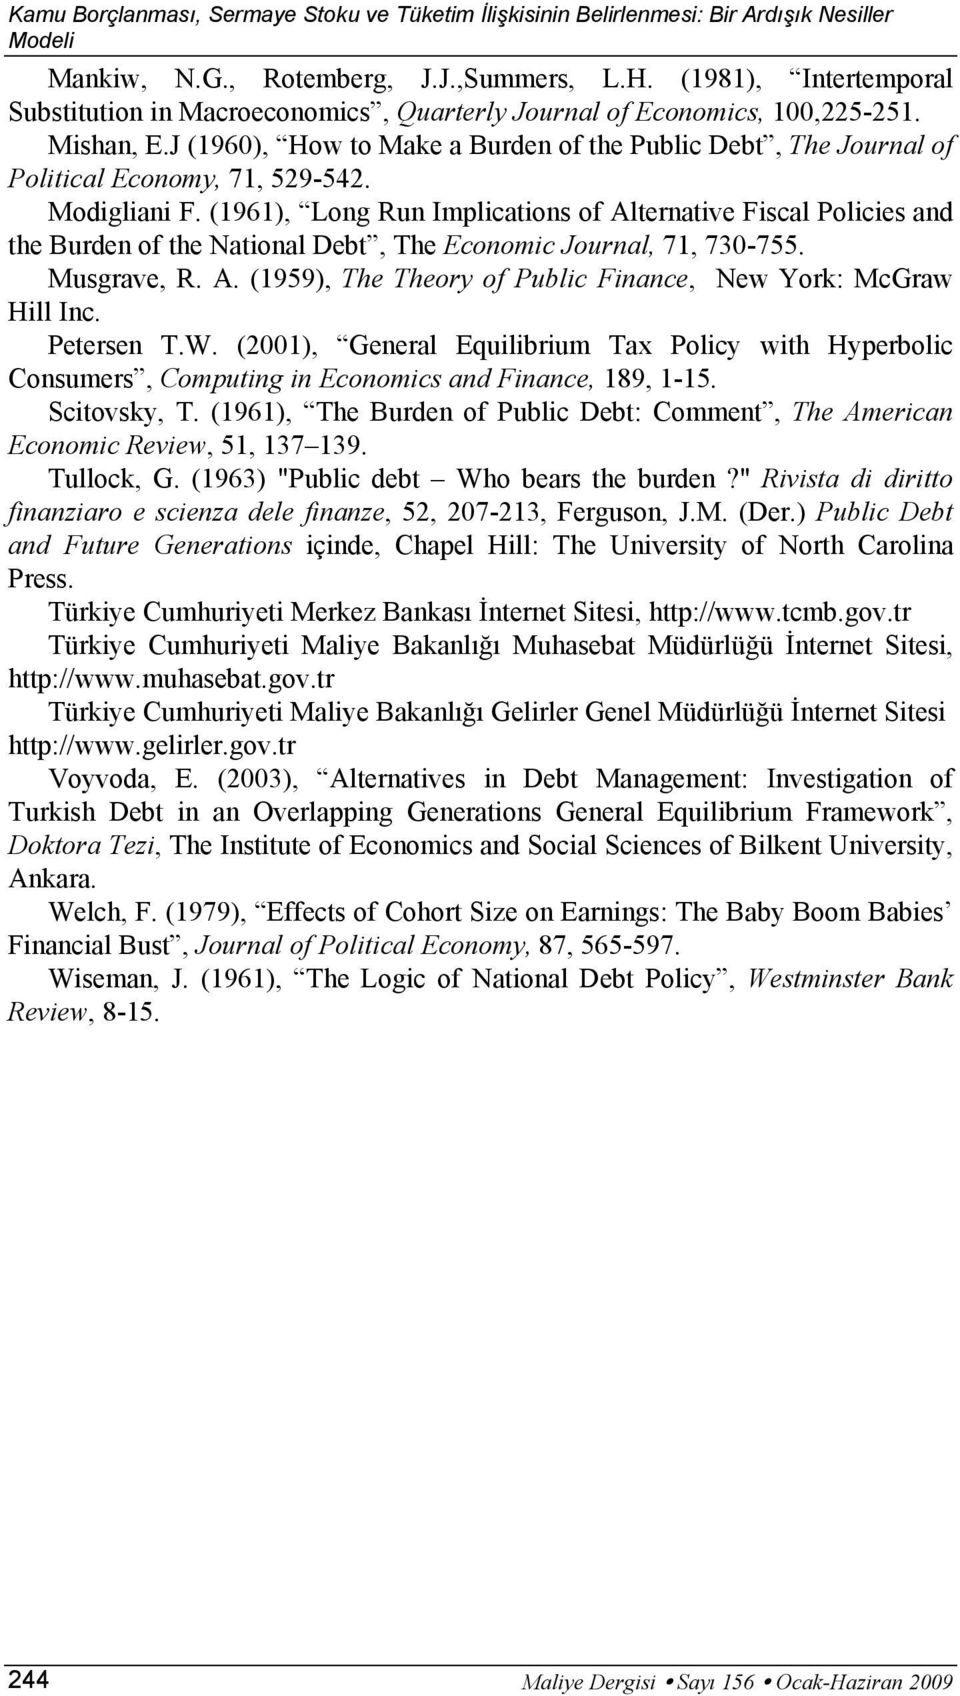 Modigliani F. (1961), Long Run Implicaions of Alernaive Fiscal Policies and he Burden of he Naional Deb, The Economic Journal, 71, 730-755. Musgrave, R. A. (1959), The Theory of Public Finance, New York: McGraw Hill Inc.